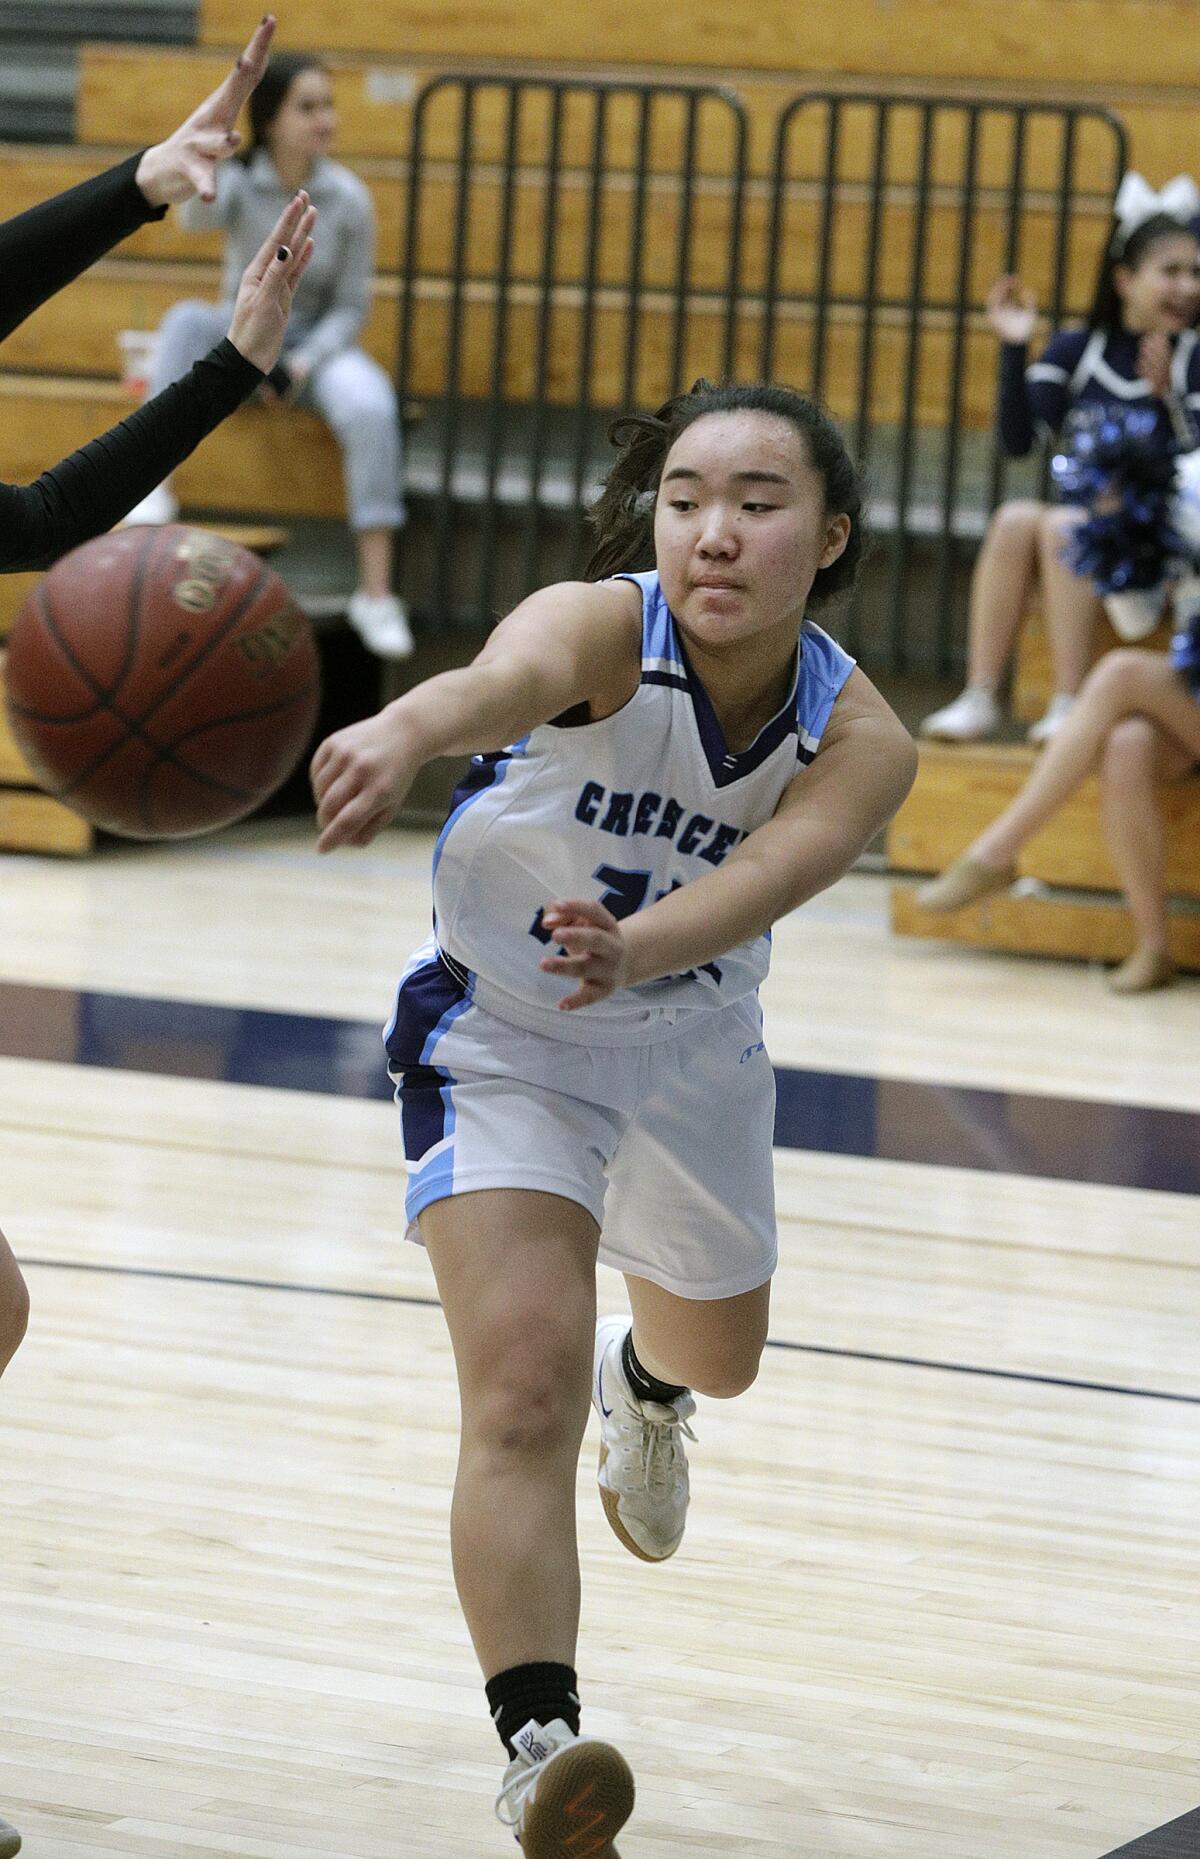 Crescenta Valley's Hannah Tanita gets to the baseline to pass inside against Glendale in a Pacific League girls' basketball game at Crescenta Valley High School on Tuesday, January 7, 2020.